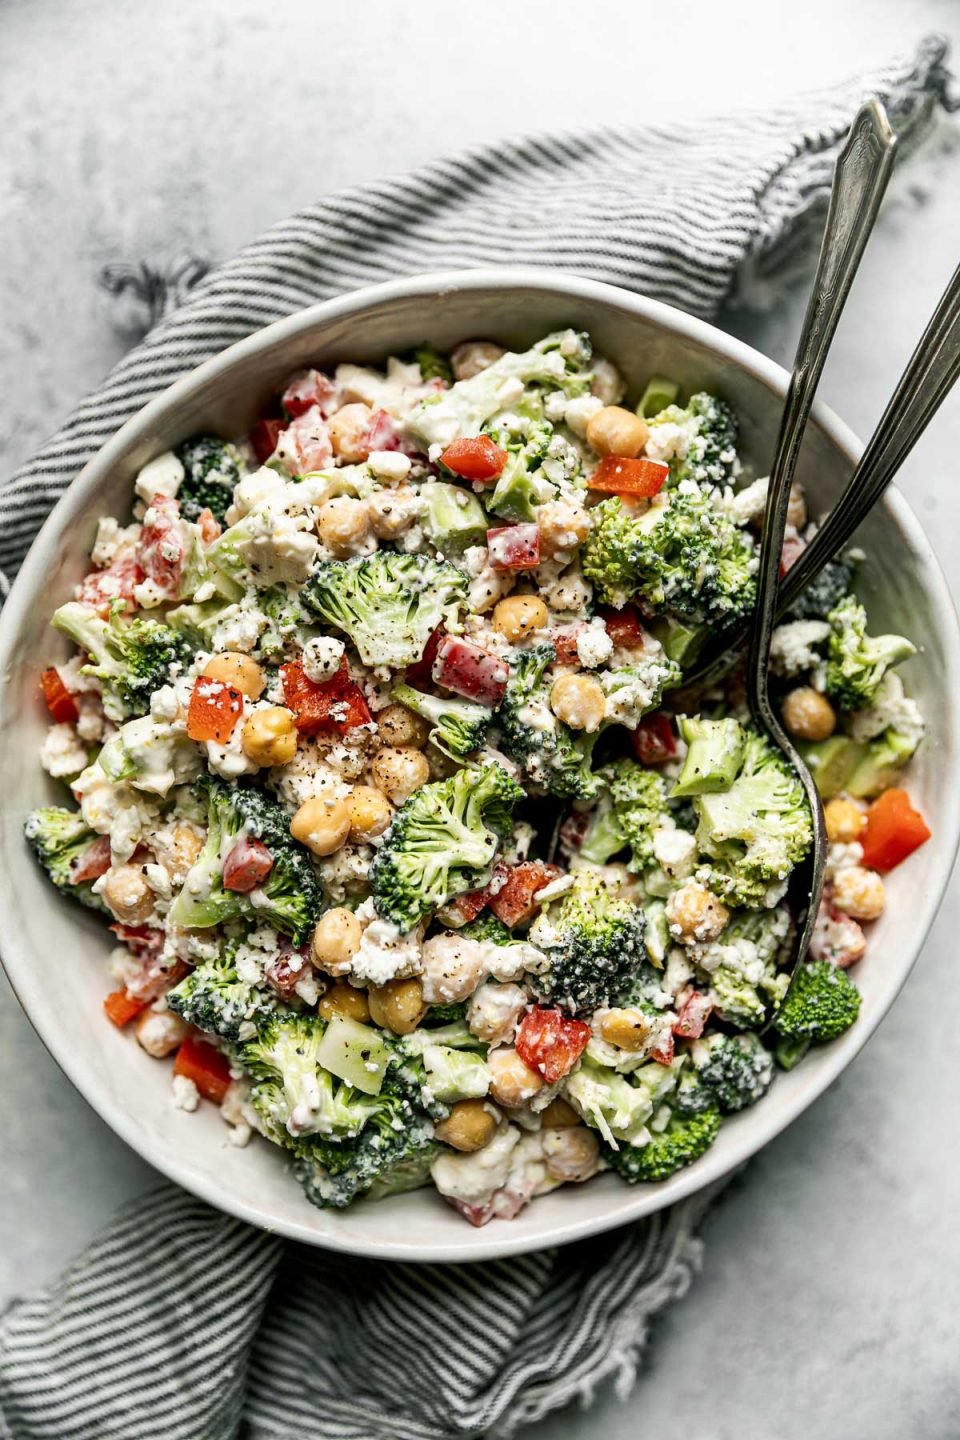 Healthy broccoli salad in a large white serving bowl atop a gray & white striped linen napkin on a light gray surface. 2 rustic serving spoons are nestled into the broccoli salad.